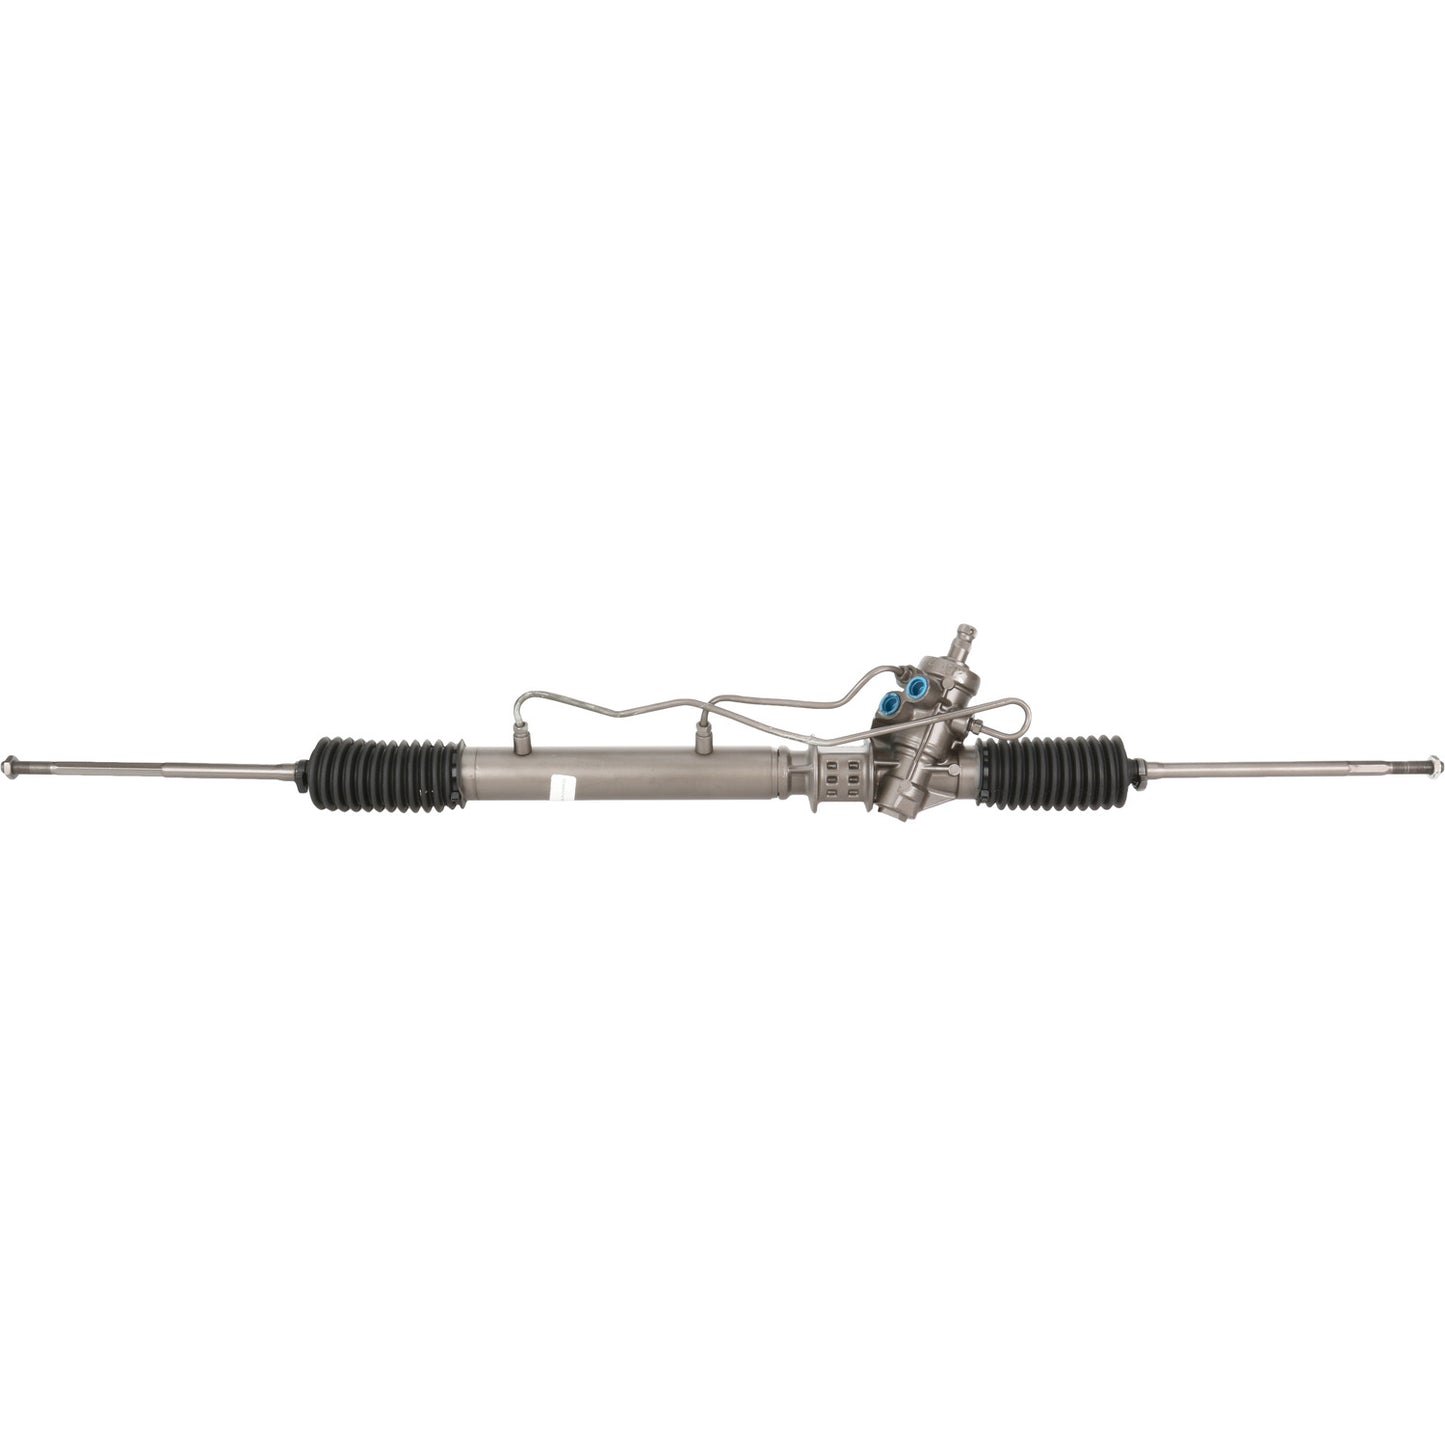 Rack and Pinion Assembly - MAVAL - Hydraulic Power - Remanufactured - 9201M